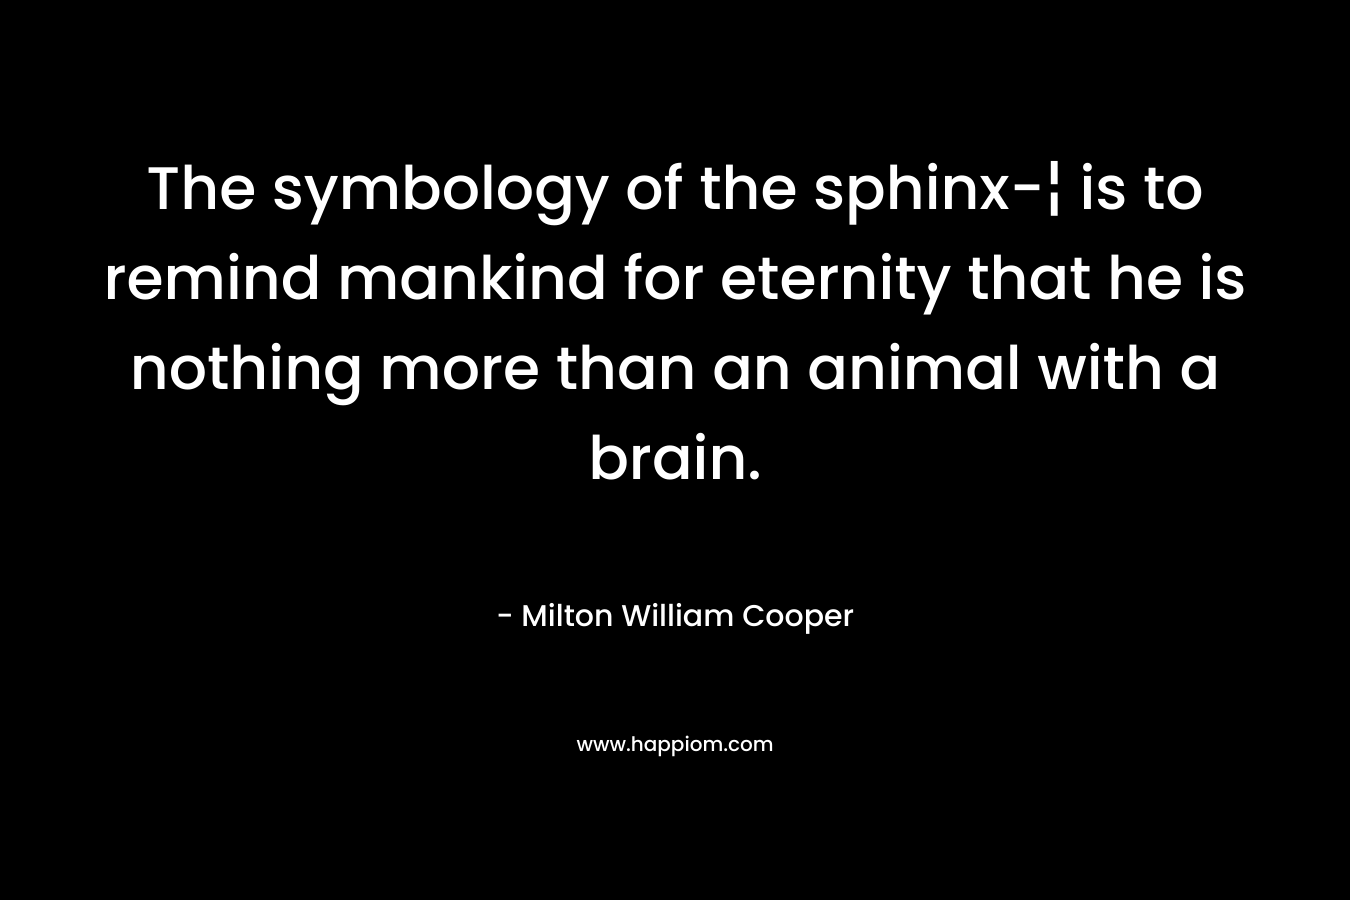 The symbology of the sphinx-¦ is to remind mankind for eternity that he is nothing more than an animal with a brain. – Milton William Cooper